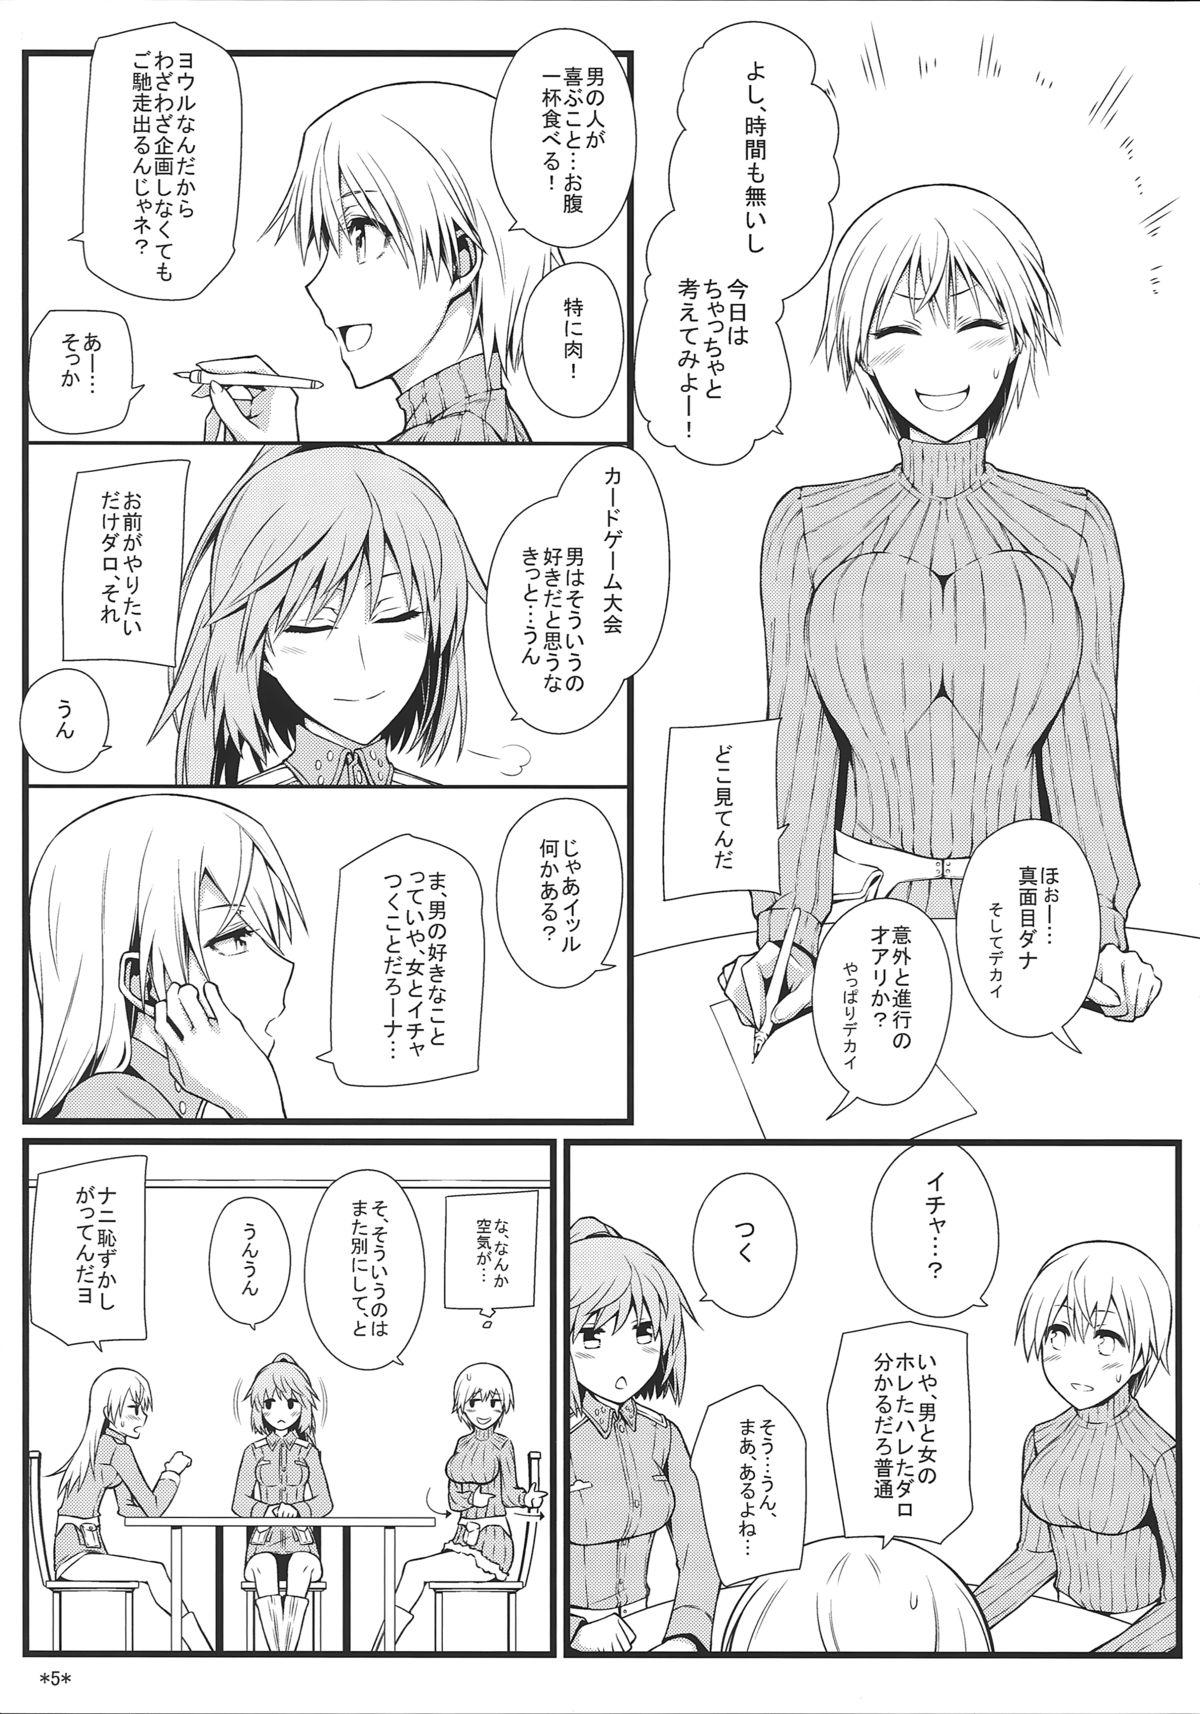 Cheating Wife KARLSLAND SYNDROME 3 - Strike witches Foreplay - Page 7